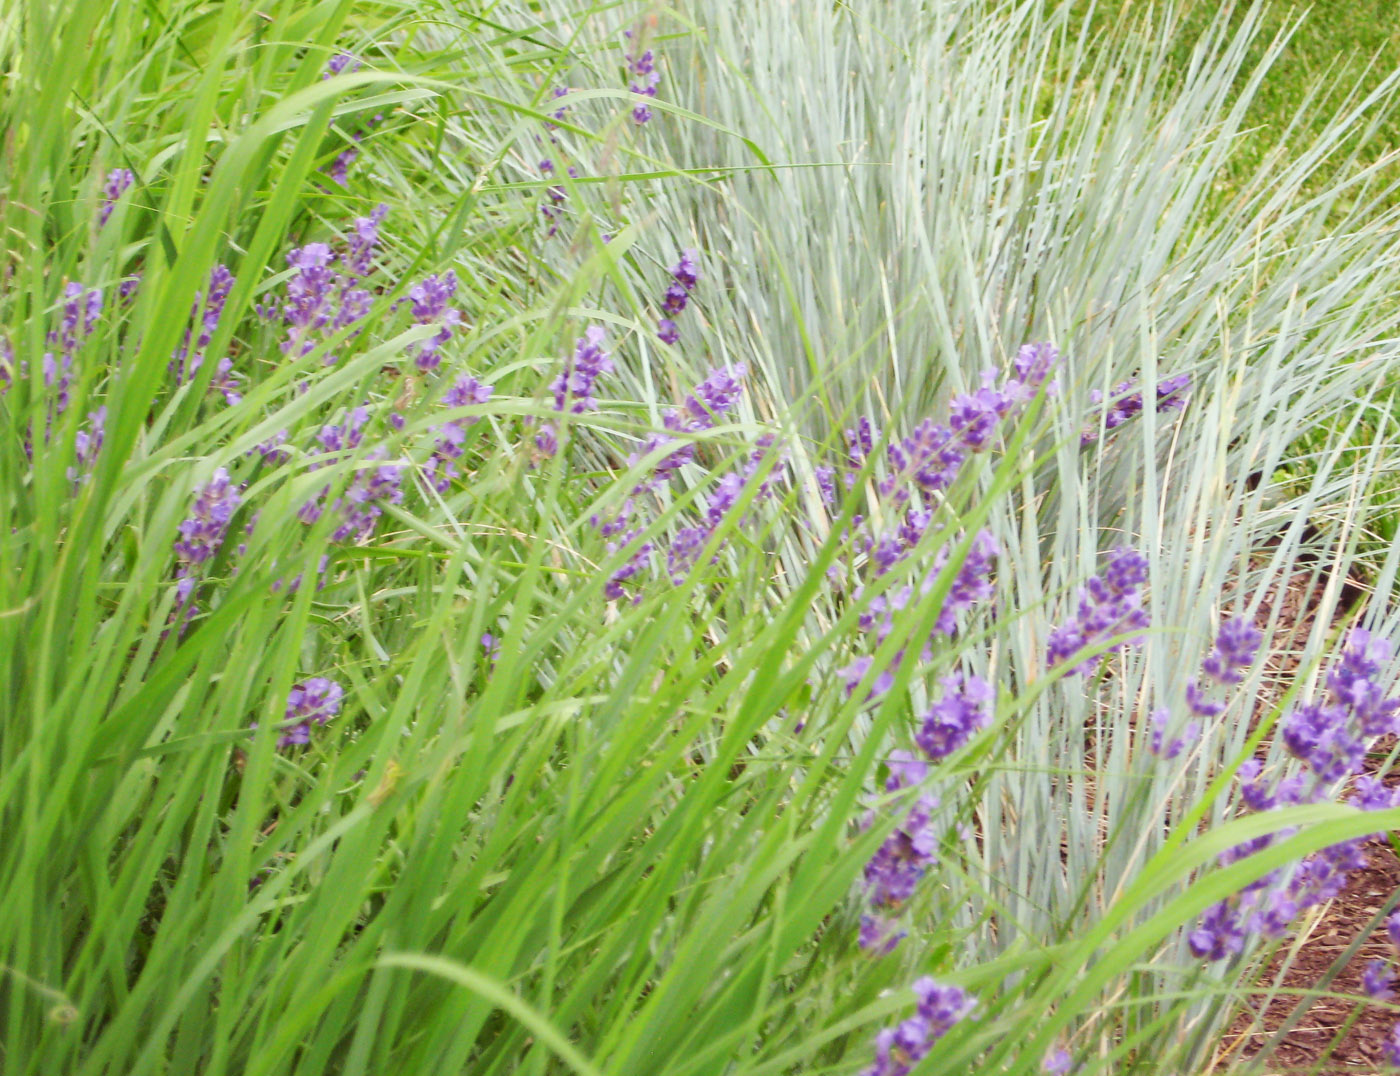 A mix of lavender, blue oat grass, and side-oats grama grass in a landscape designed and installed by Prairieform's John Kamp in Minneapolis.